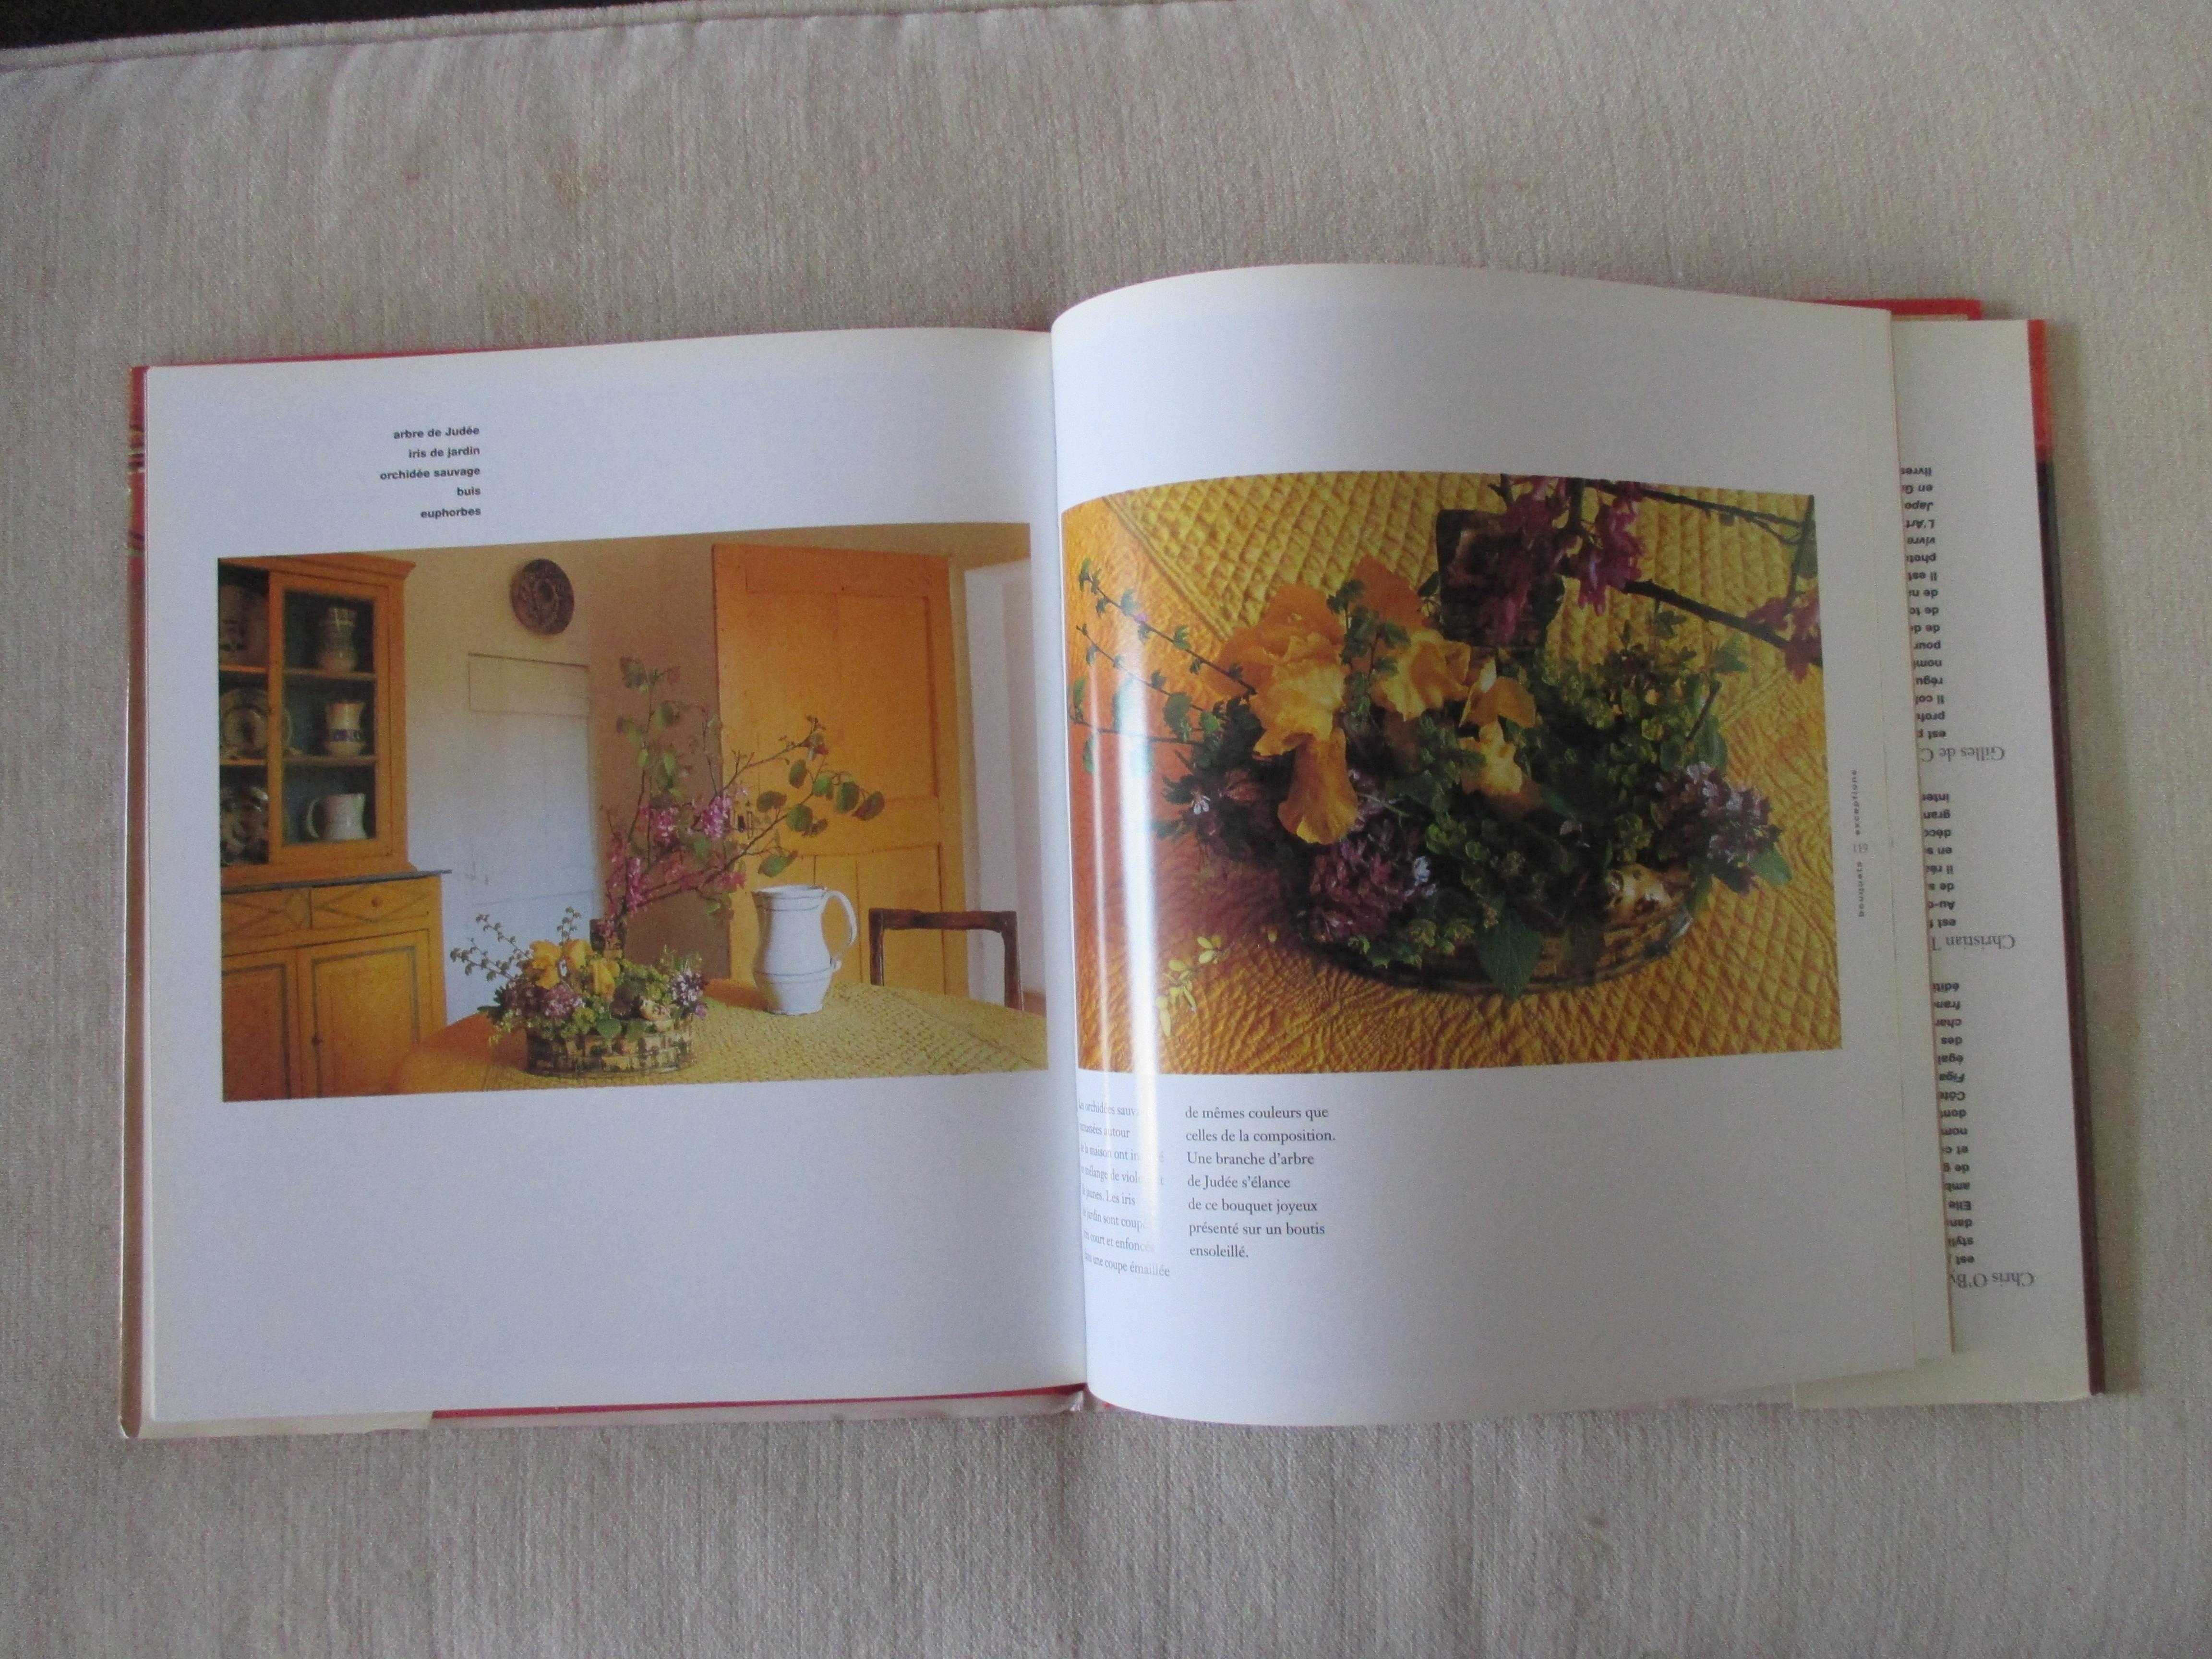 Bouquets Insolites hardcover book in French by Chris O'Byrne and Christian Tortu (florist)
Inspired by the seasons, emotions or simply nostalgia the bouquets presented here are characterized by the audacious associations of unusual elements....